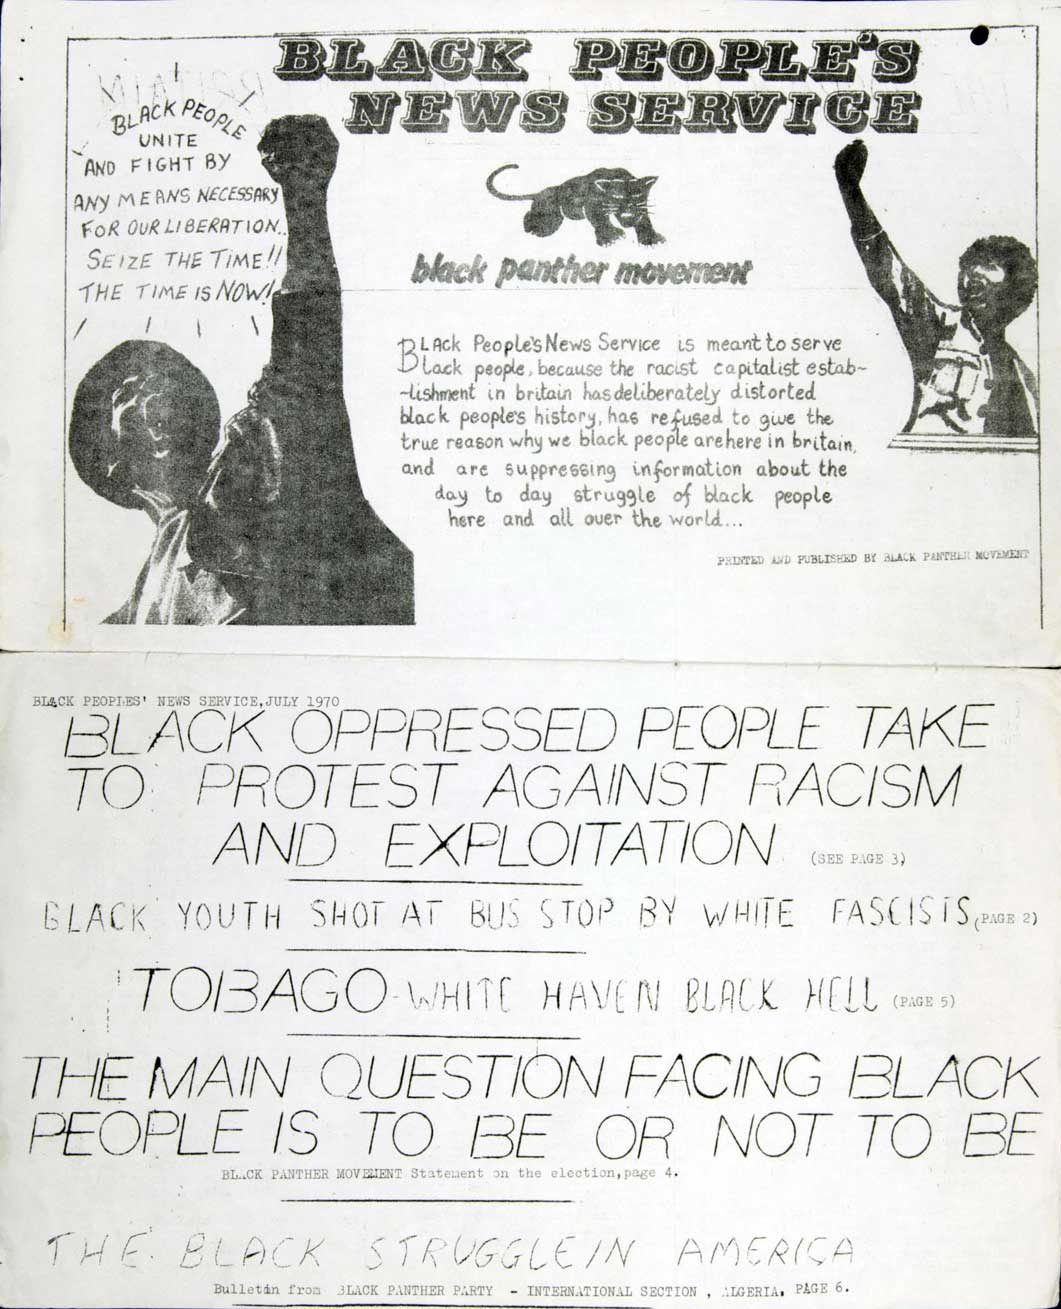 Black People’s News Service, published by the British Black Panther Party, July 1970.